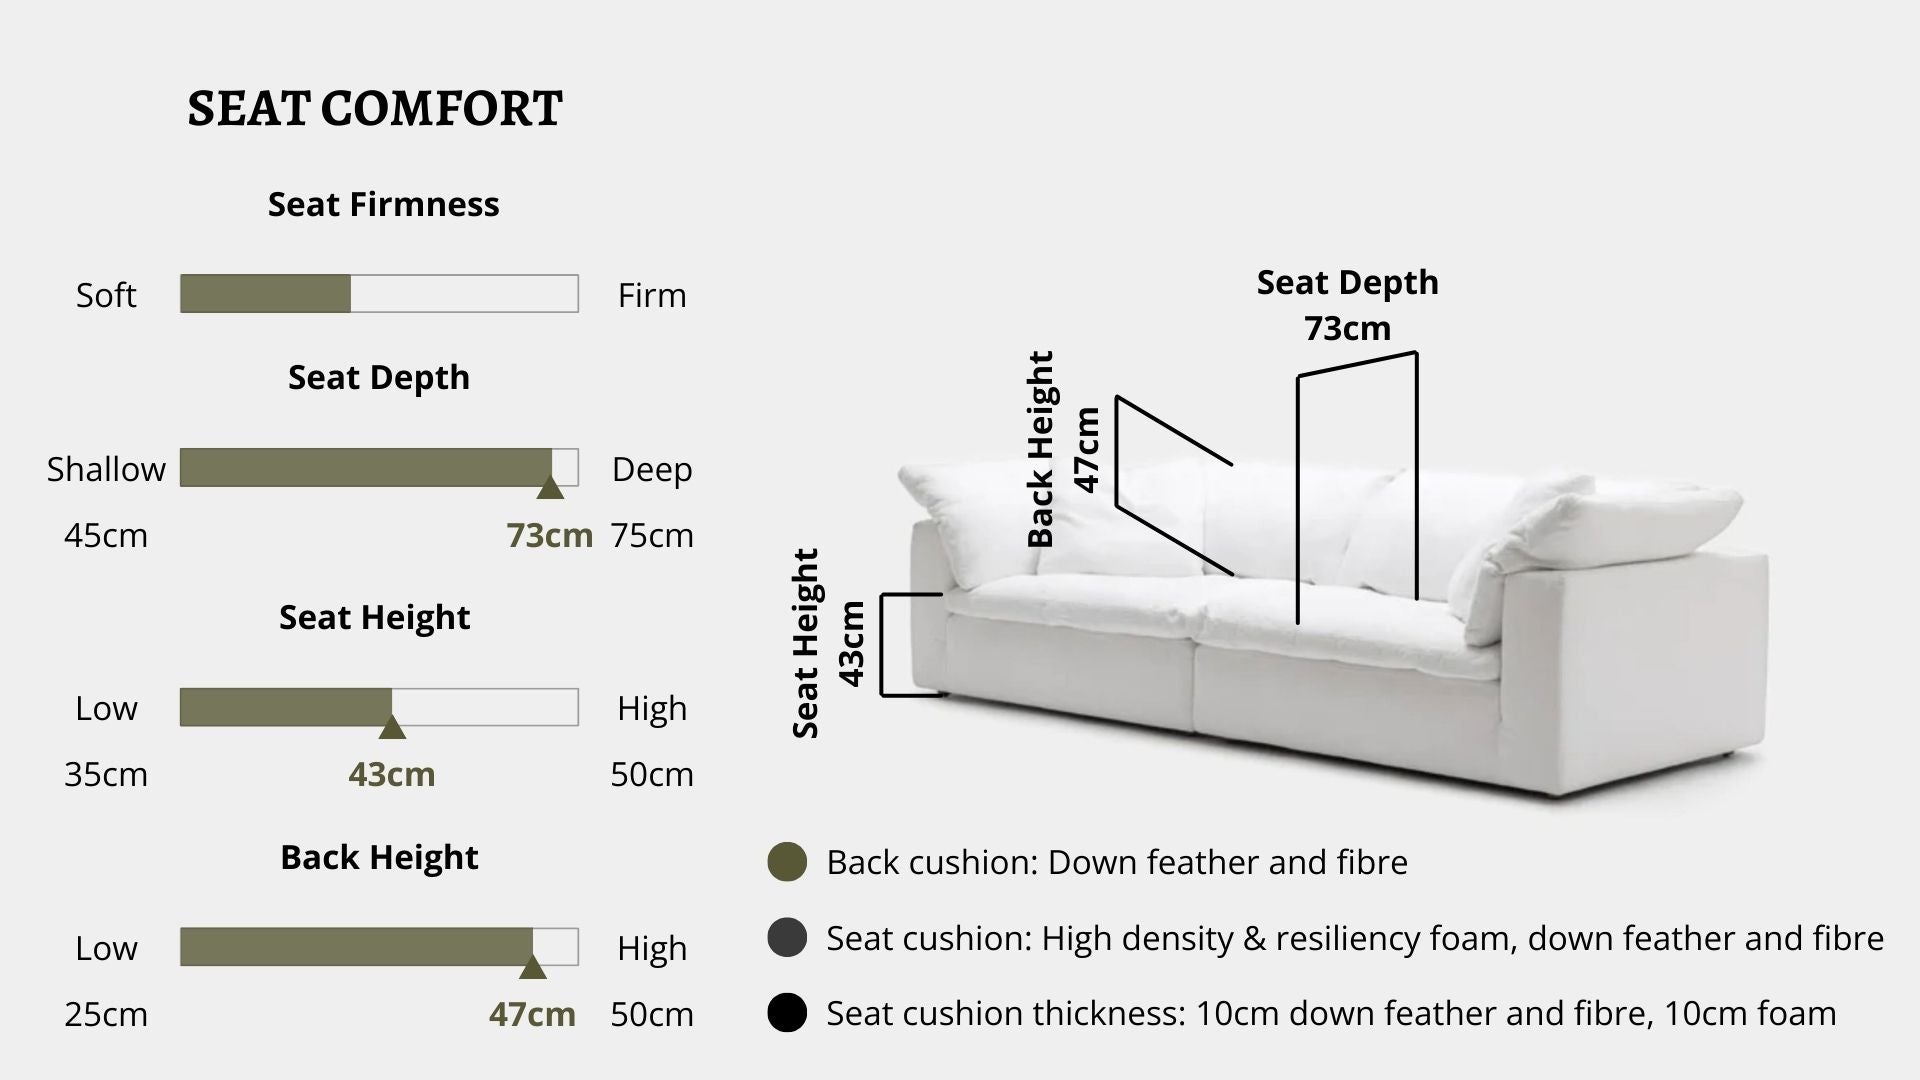 Details the key information pertaining to seat comfort such as seat firmness, seat depth, seat height, back height, cushion thickness and material used for cushions